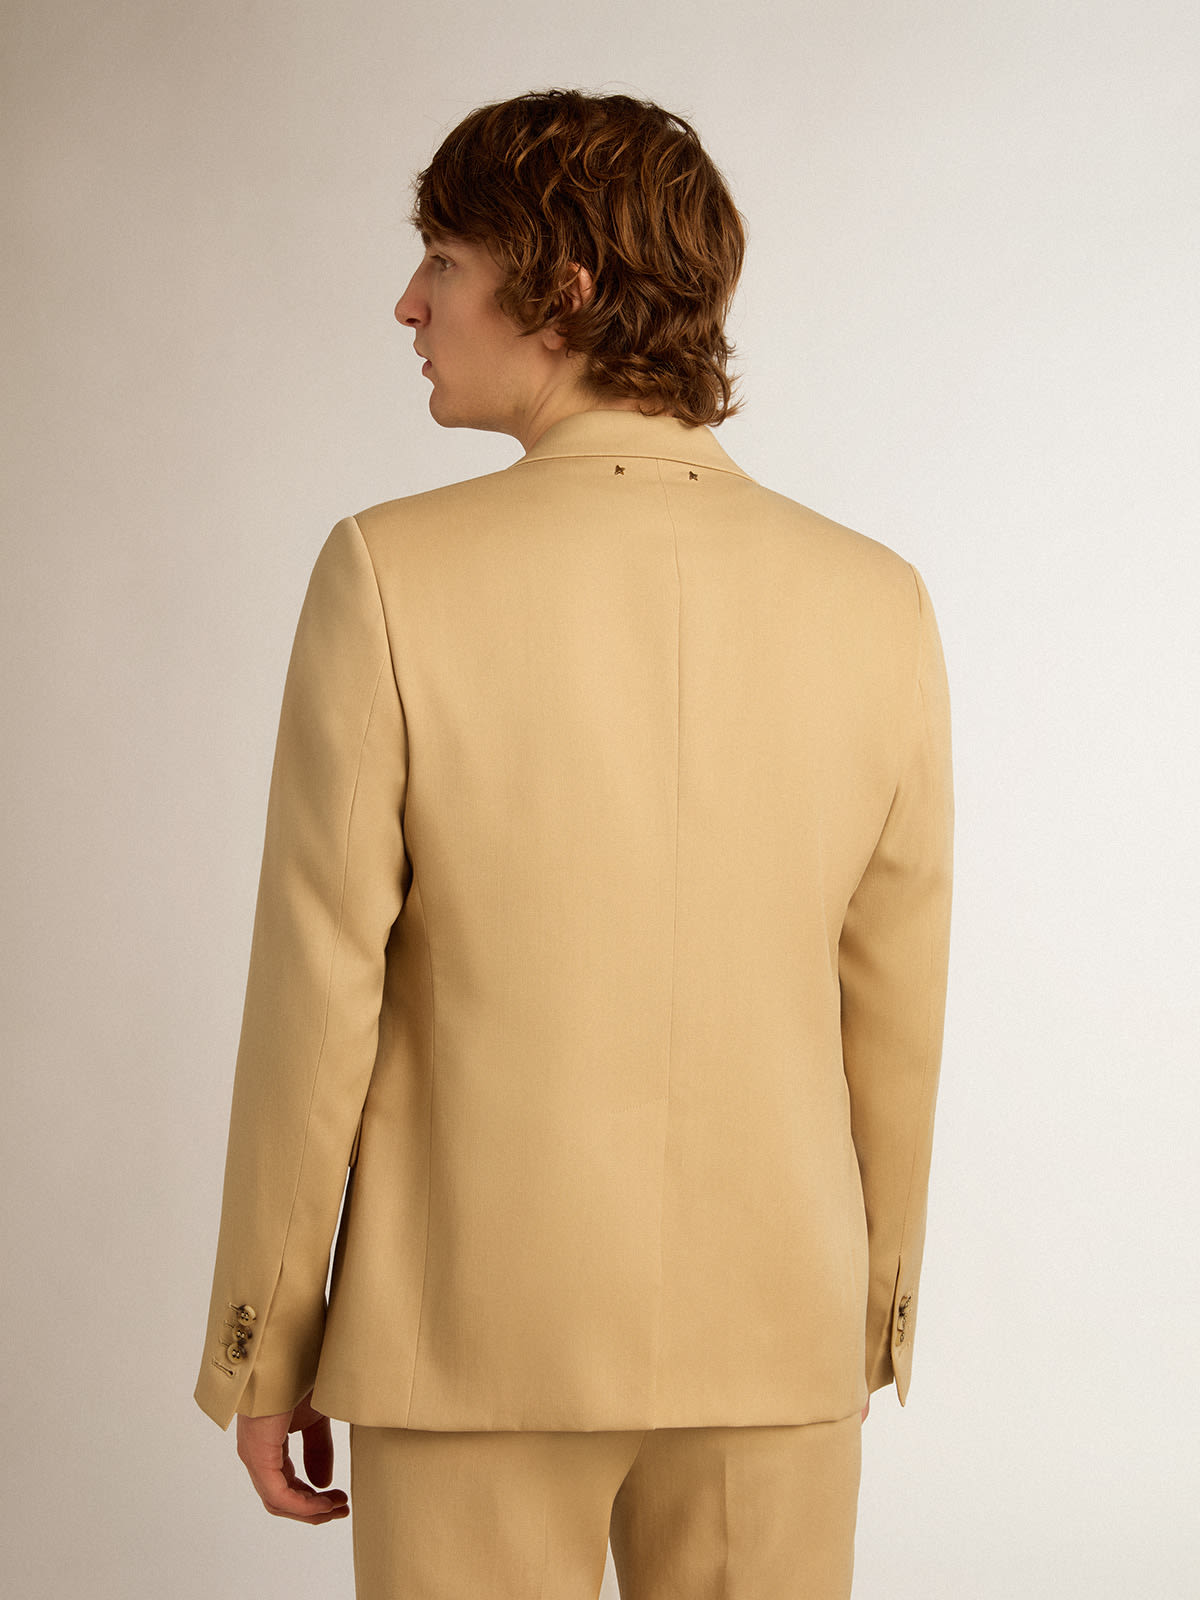 Golden Goose - Single-breasted blazer in sand with horn buttons in 